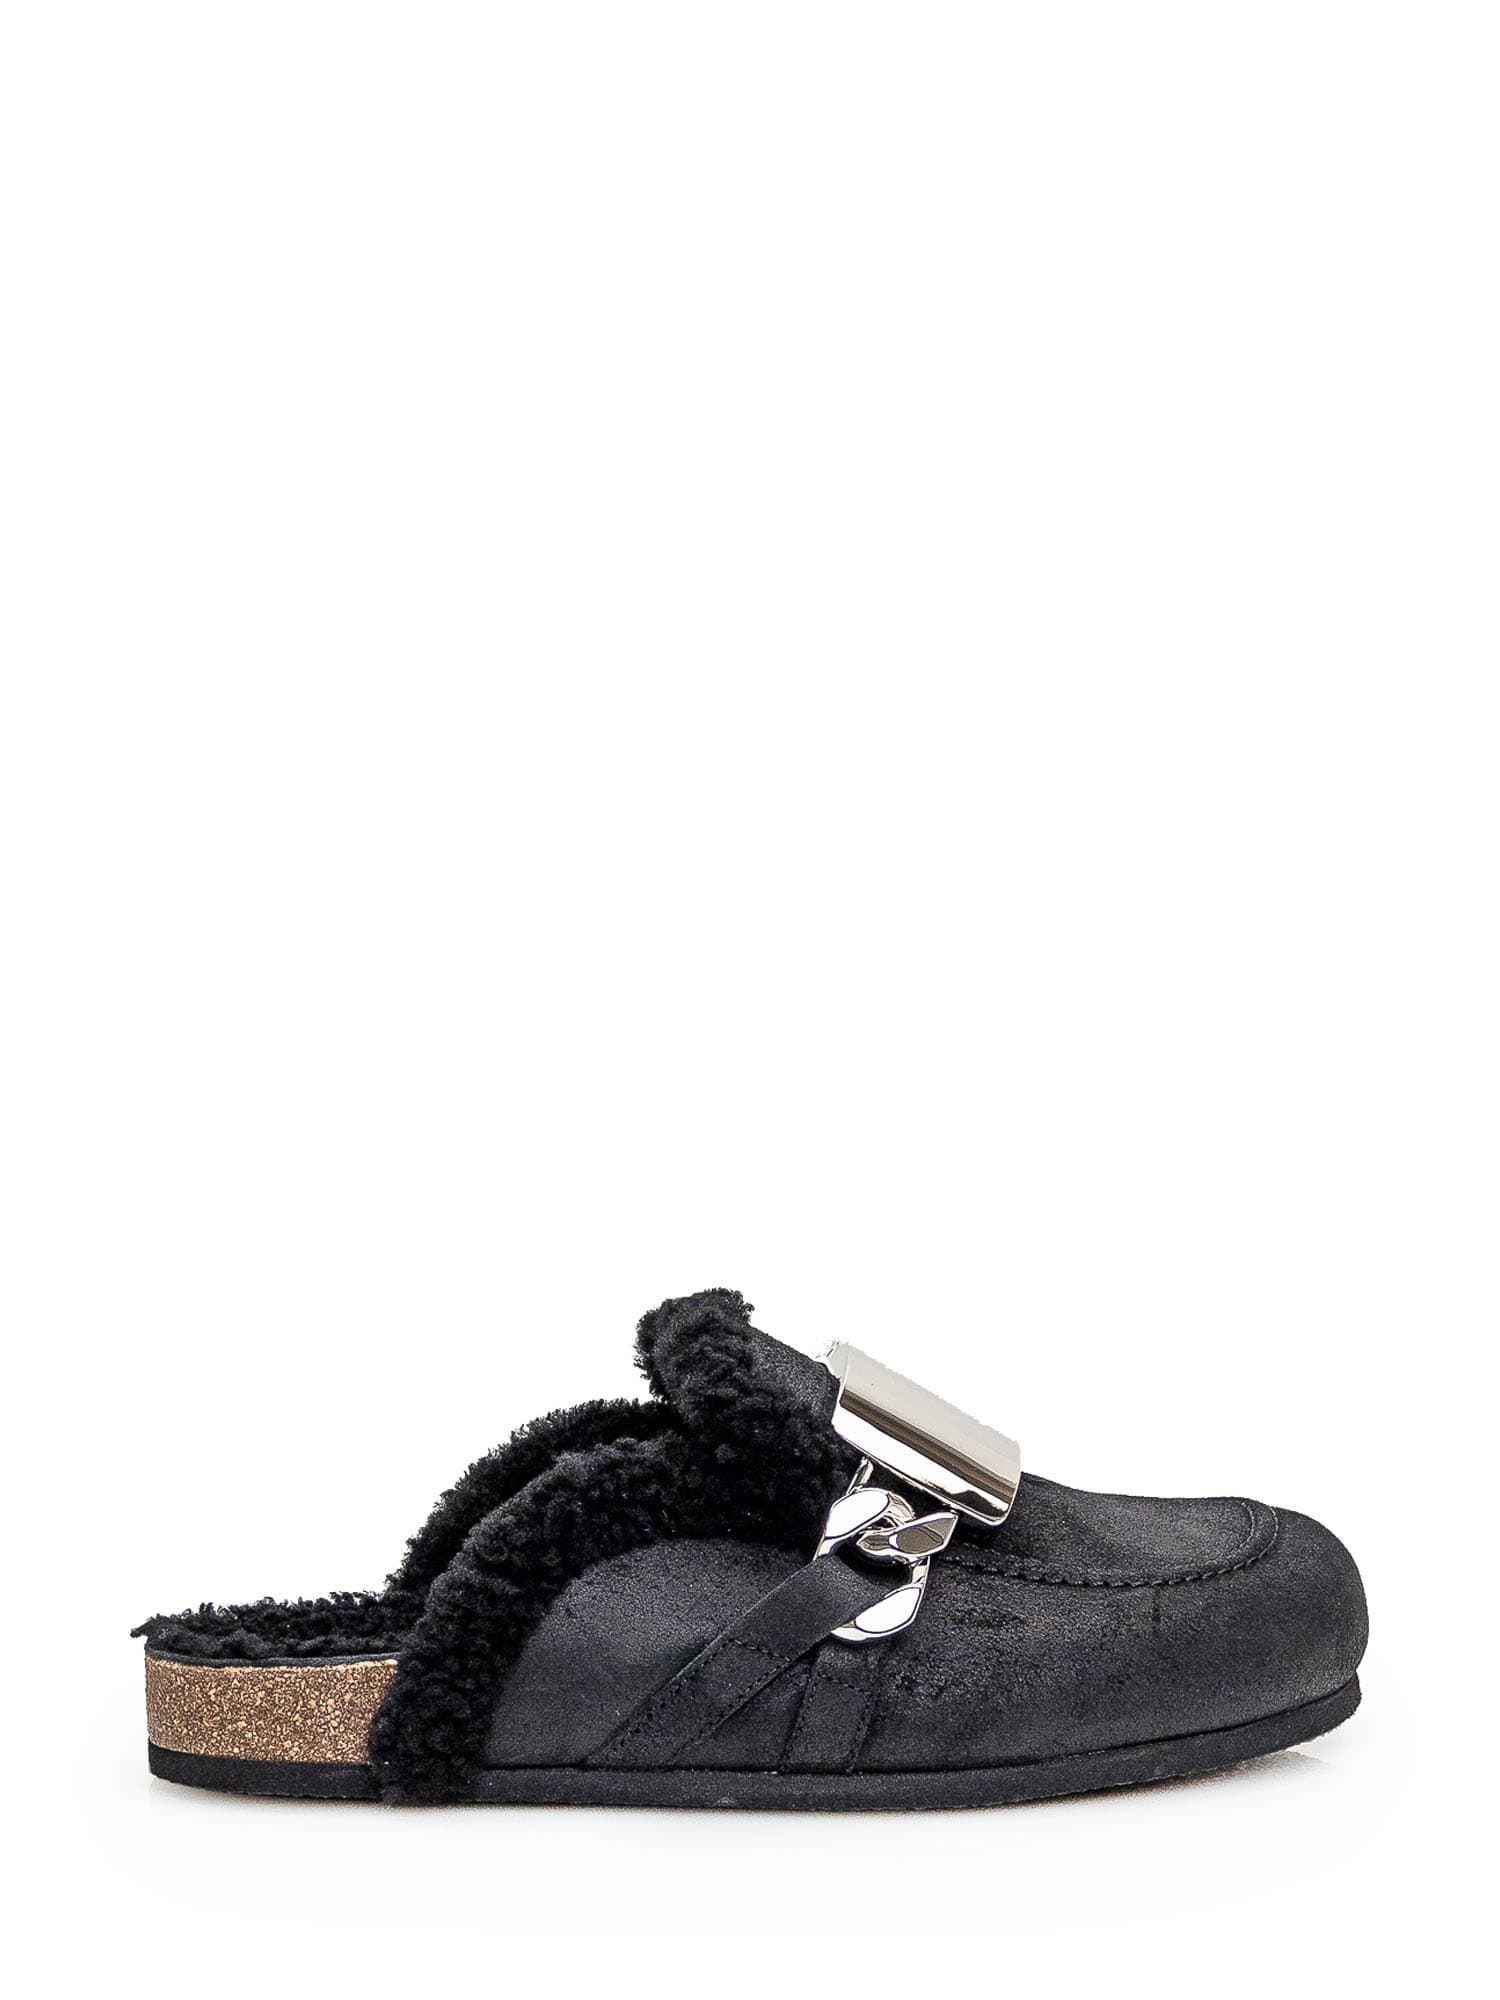 JW ANDERSON MULES SHEARLING